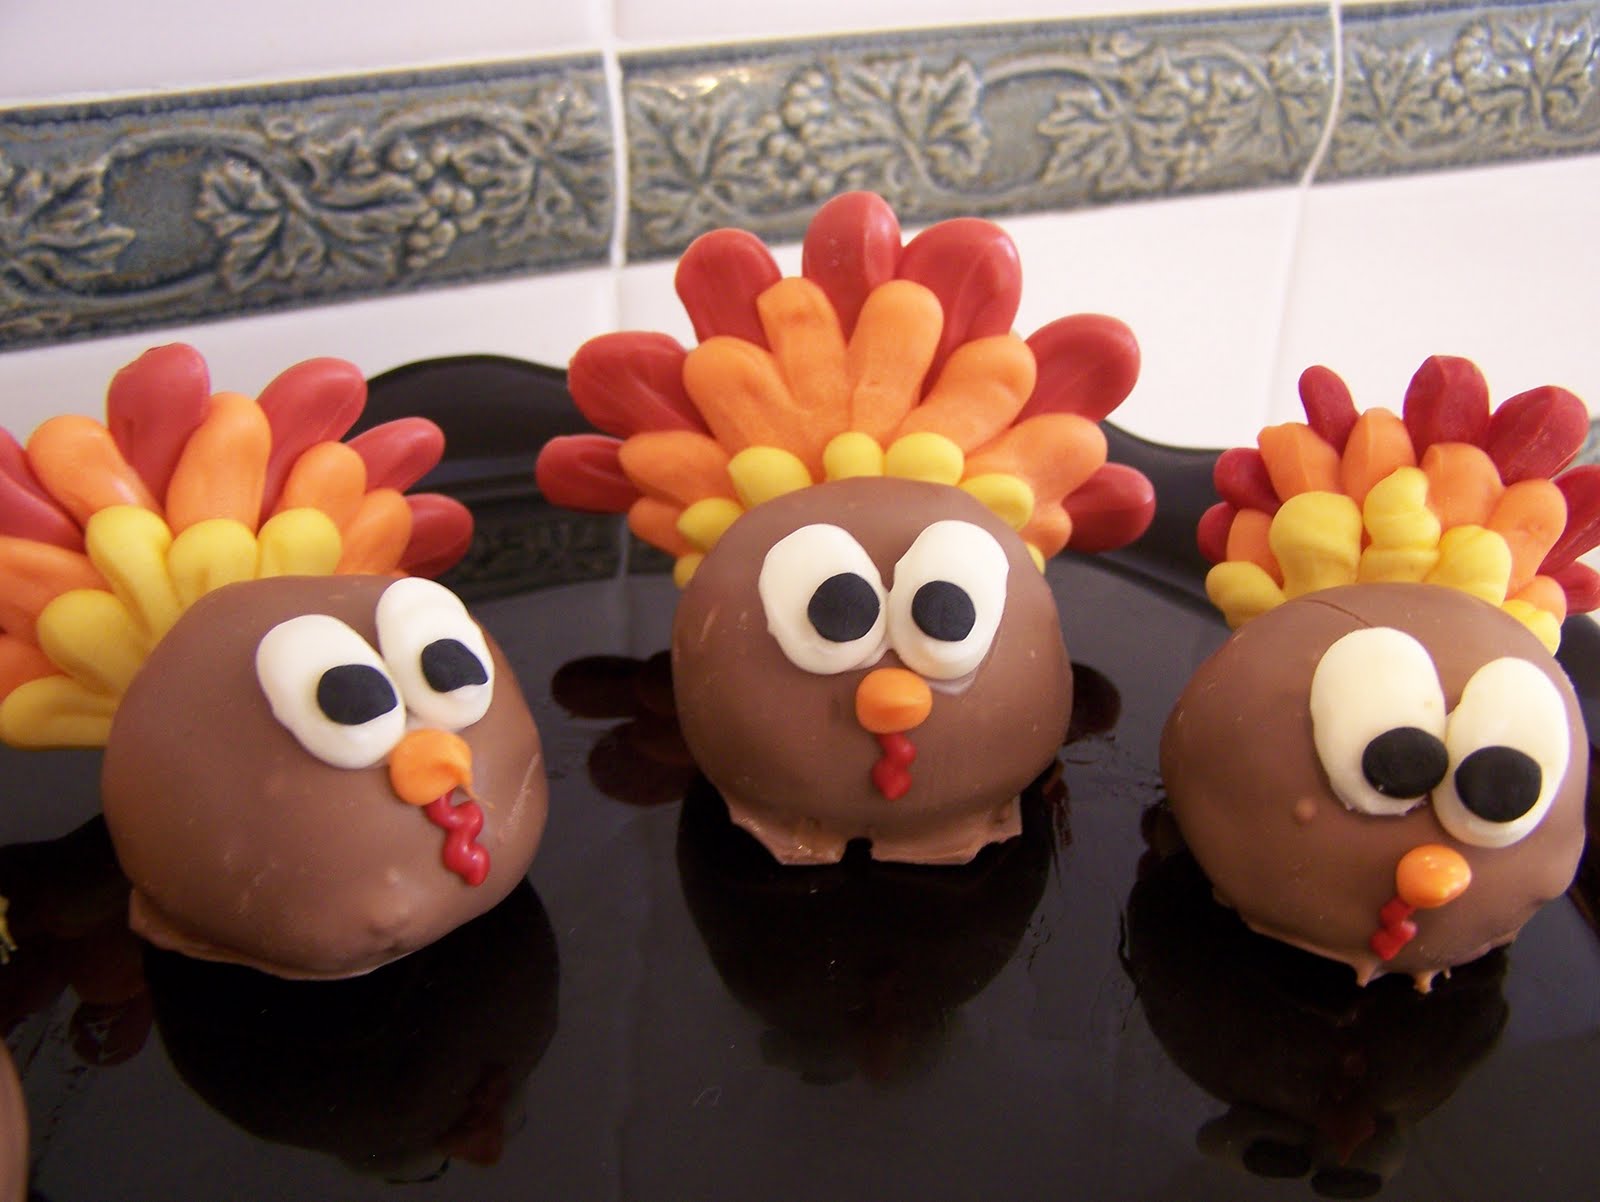 Wendy Woo Cakes: Gobble, Gobble!!! Turkey Cake Balls are here!